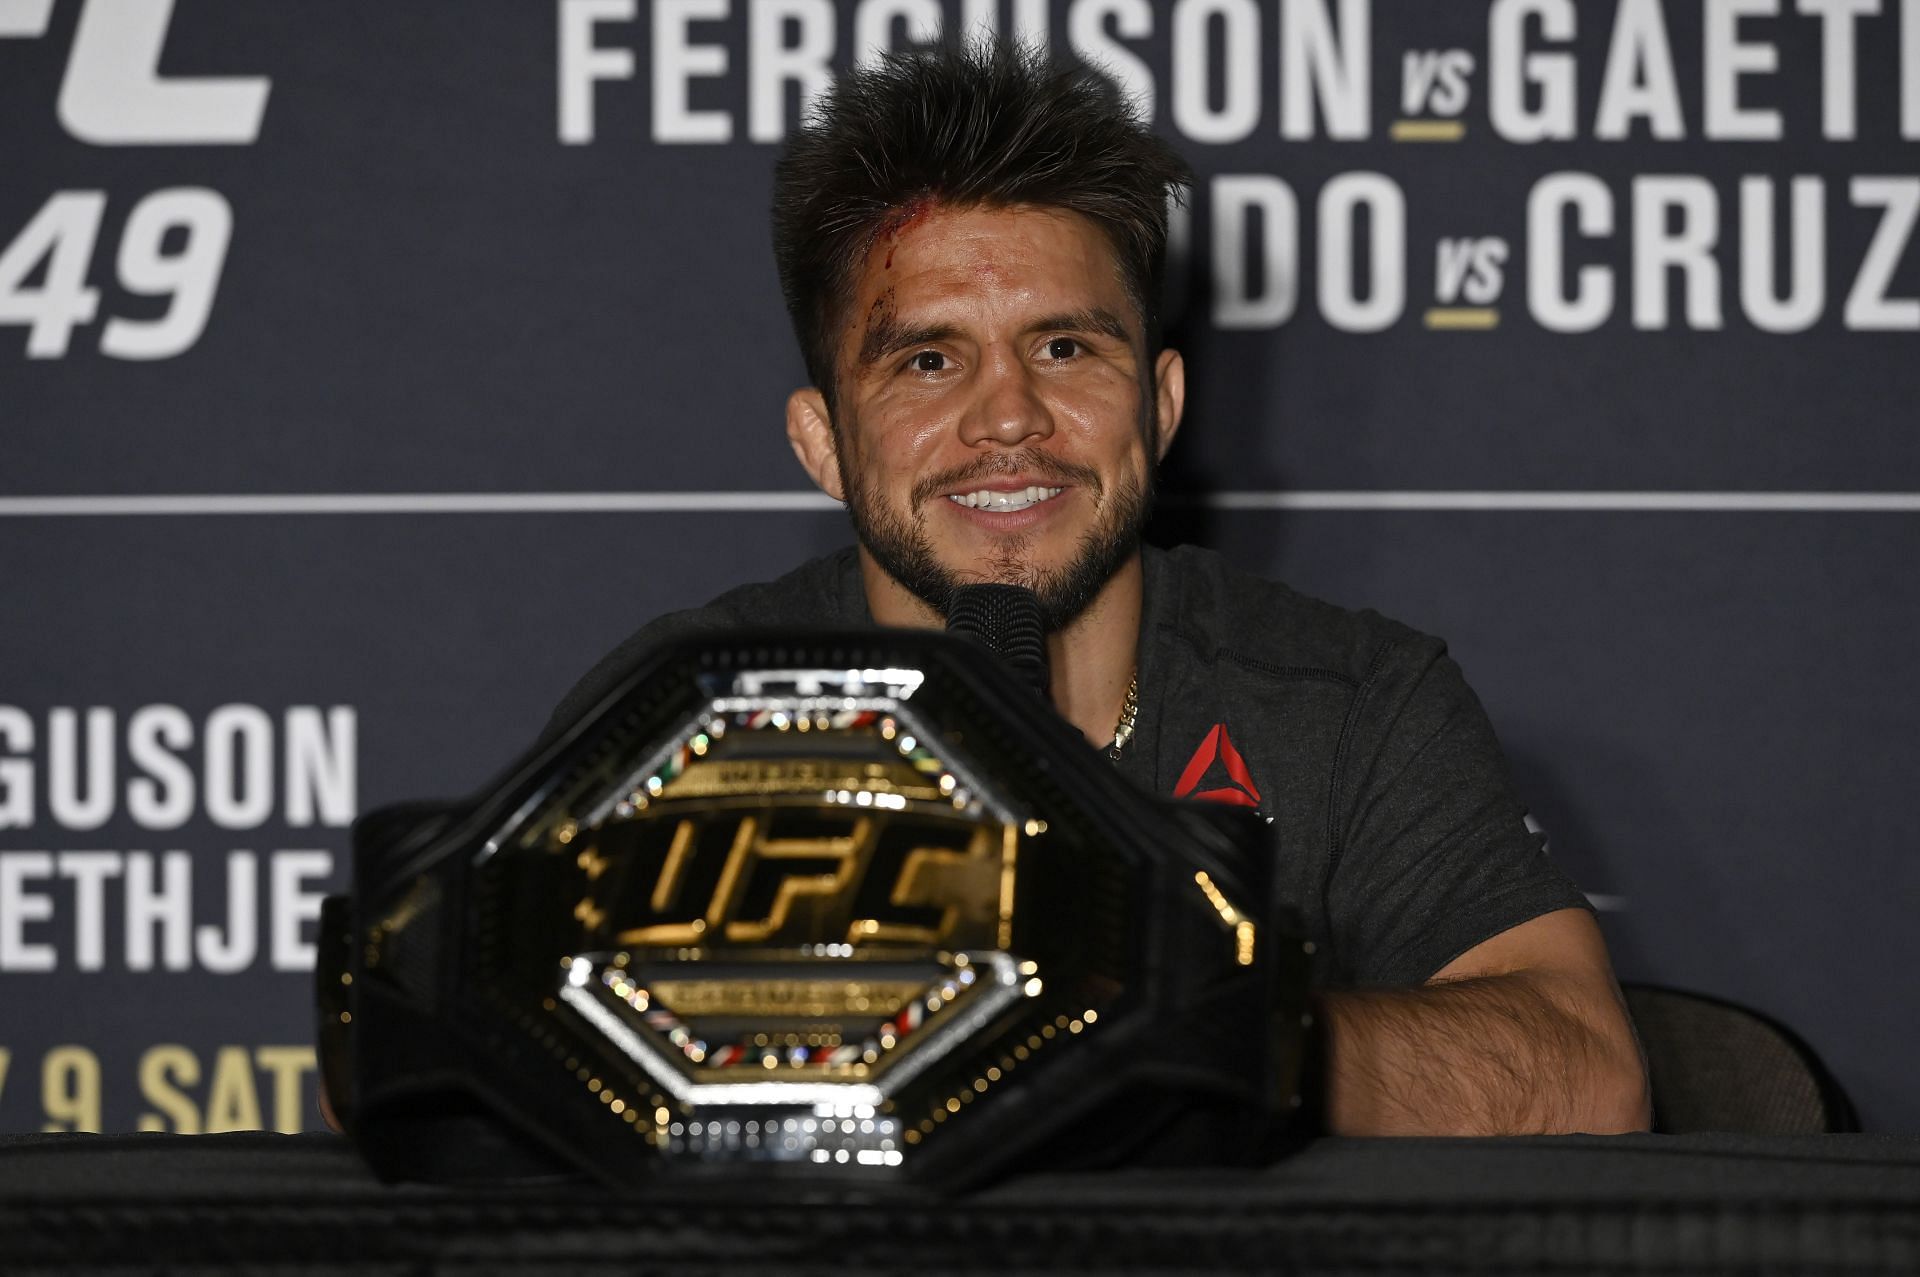 Henry Cejudo would relish the opportunity to become a three-division UFC champion